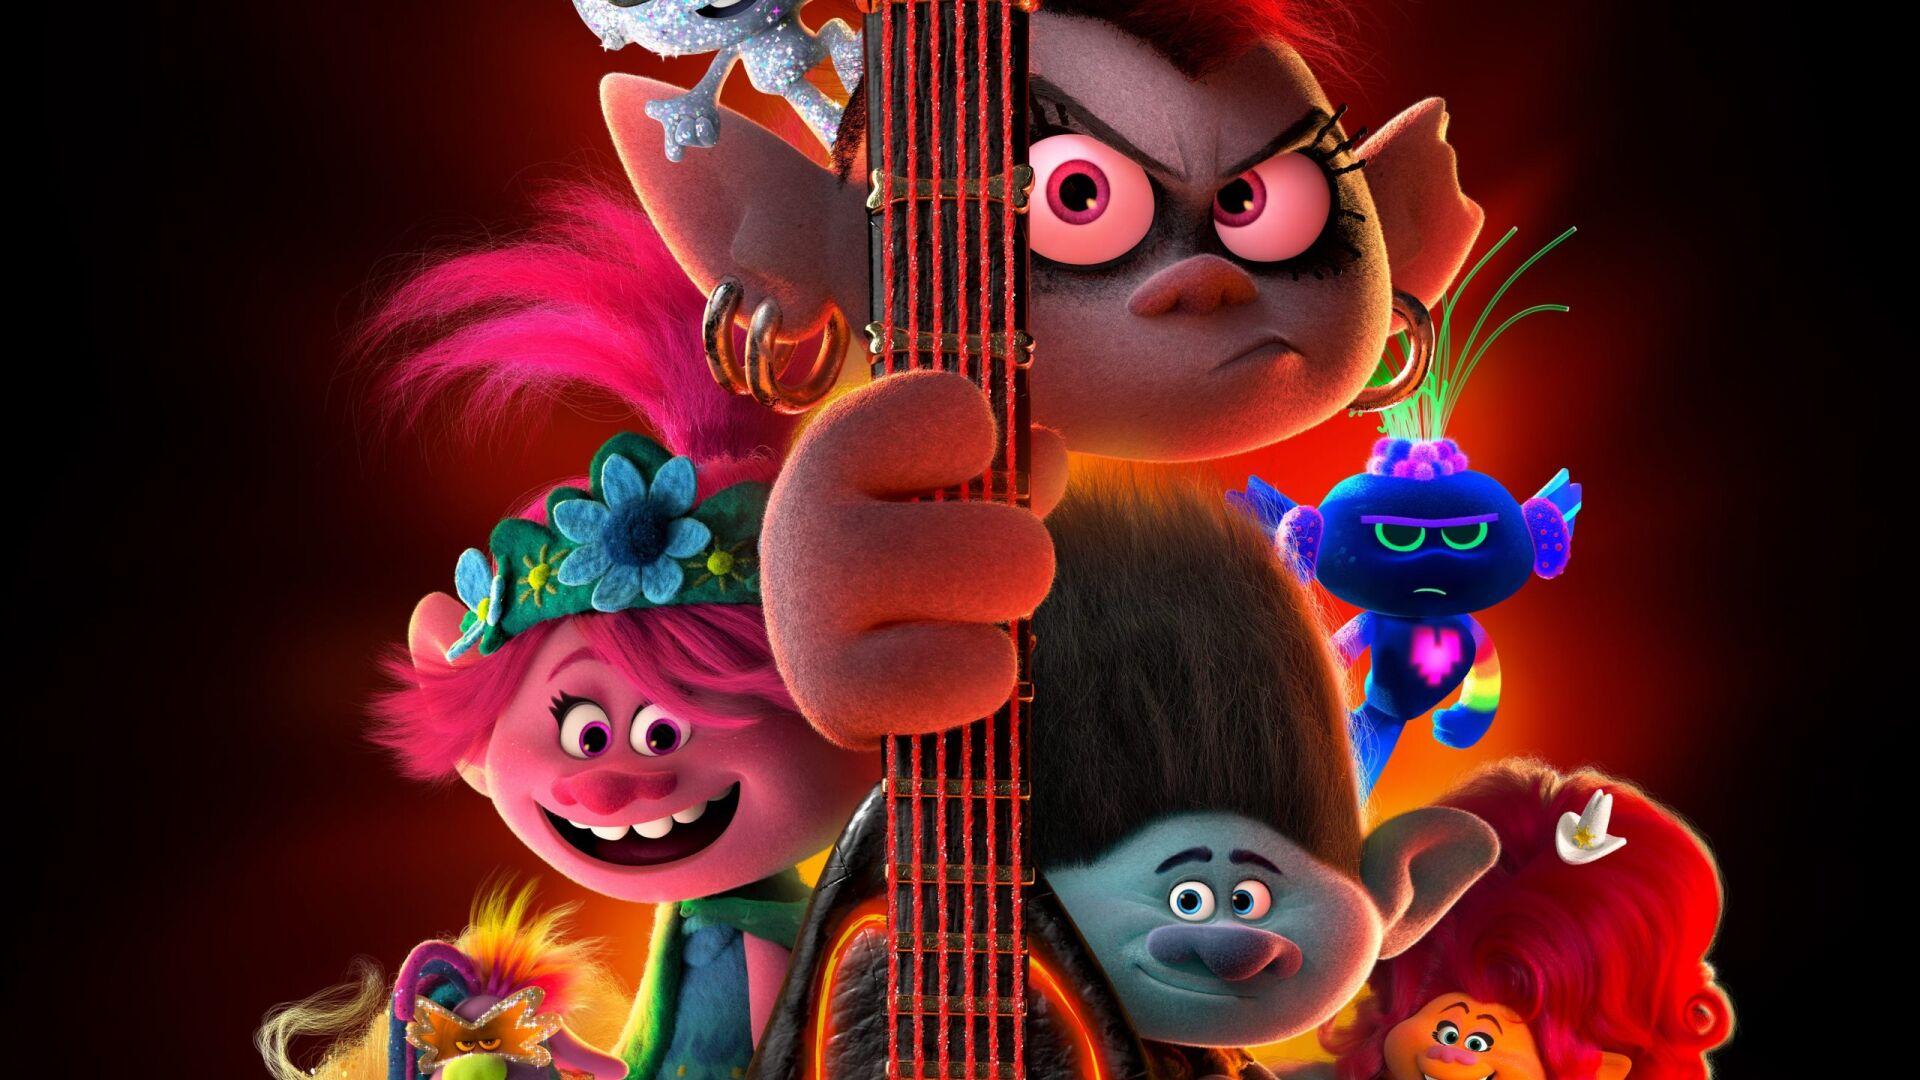 Review “Trolls 2 World Tour” finds success upon digital release